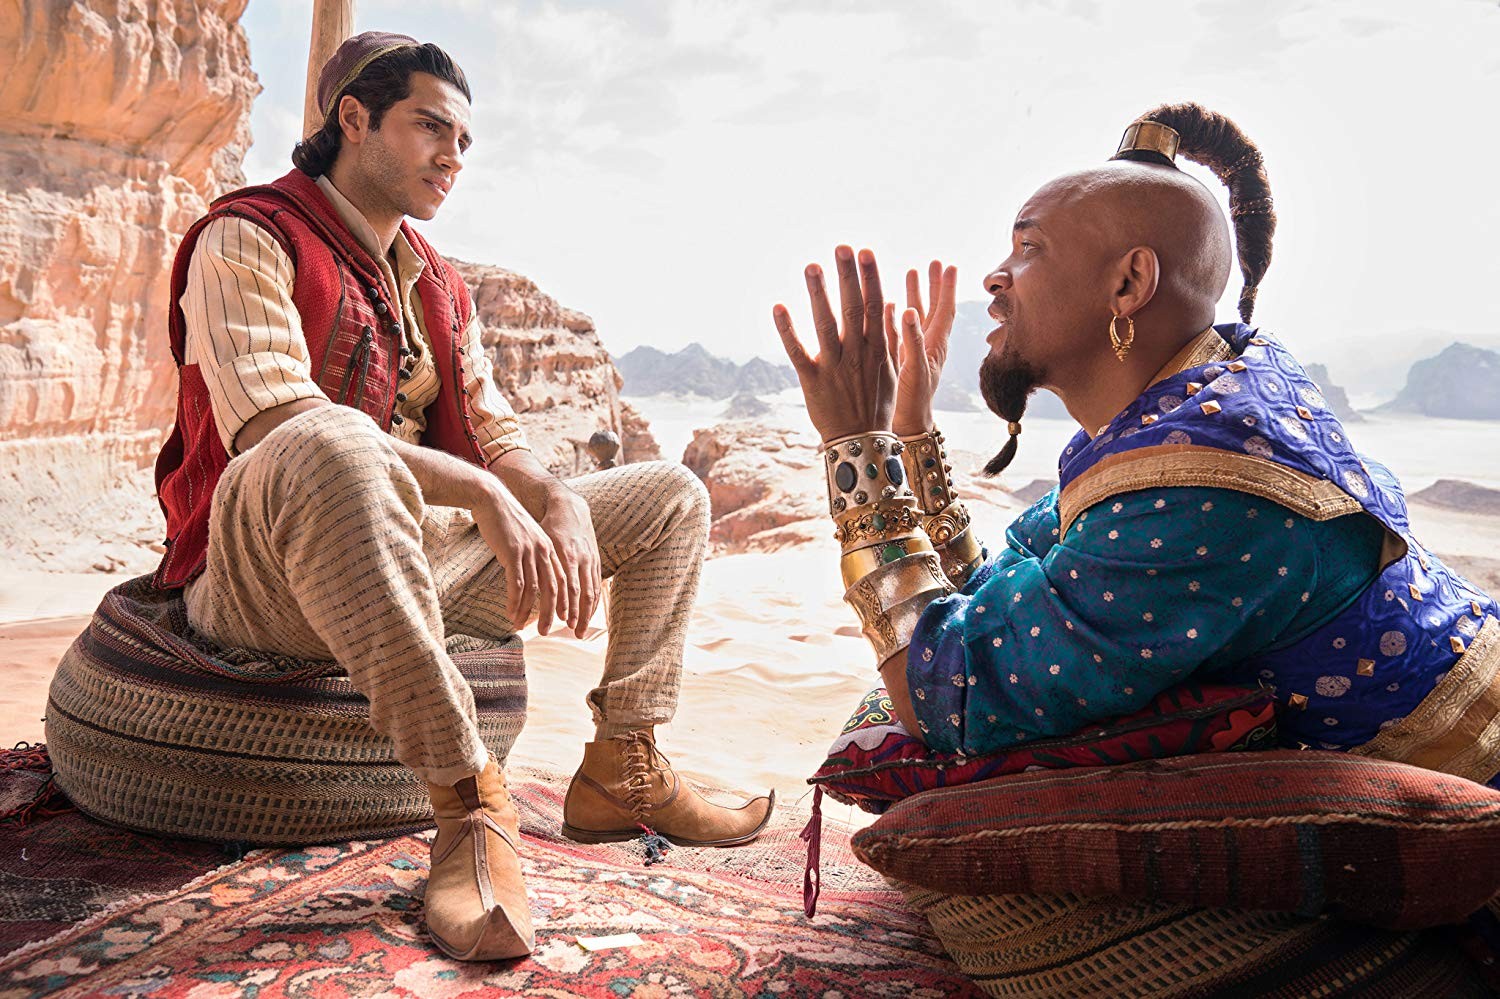 Guy Ritchie's Aladdin was a big hit or Disney in 2019